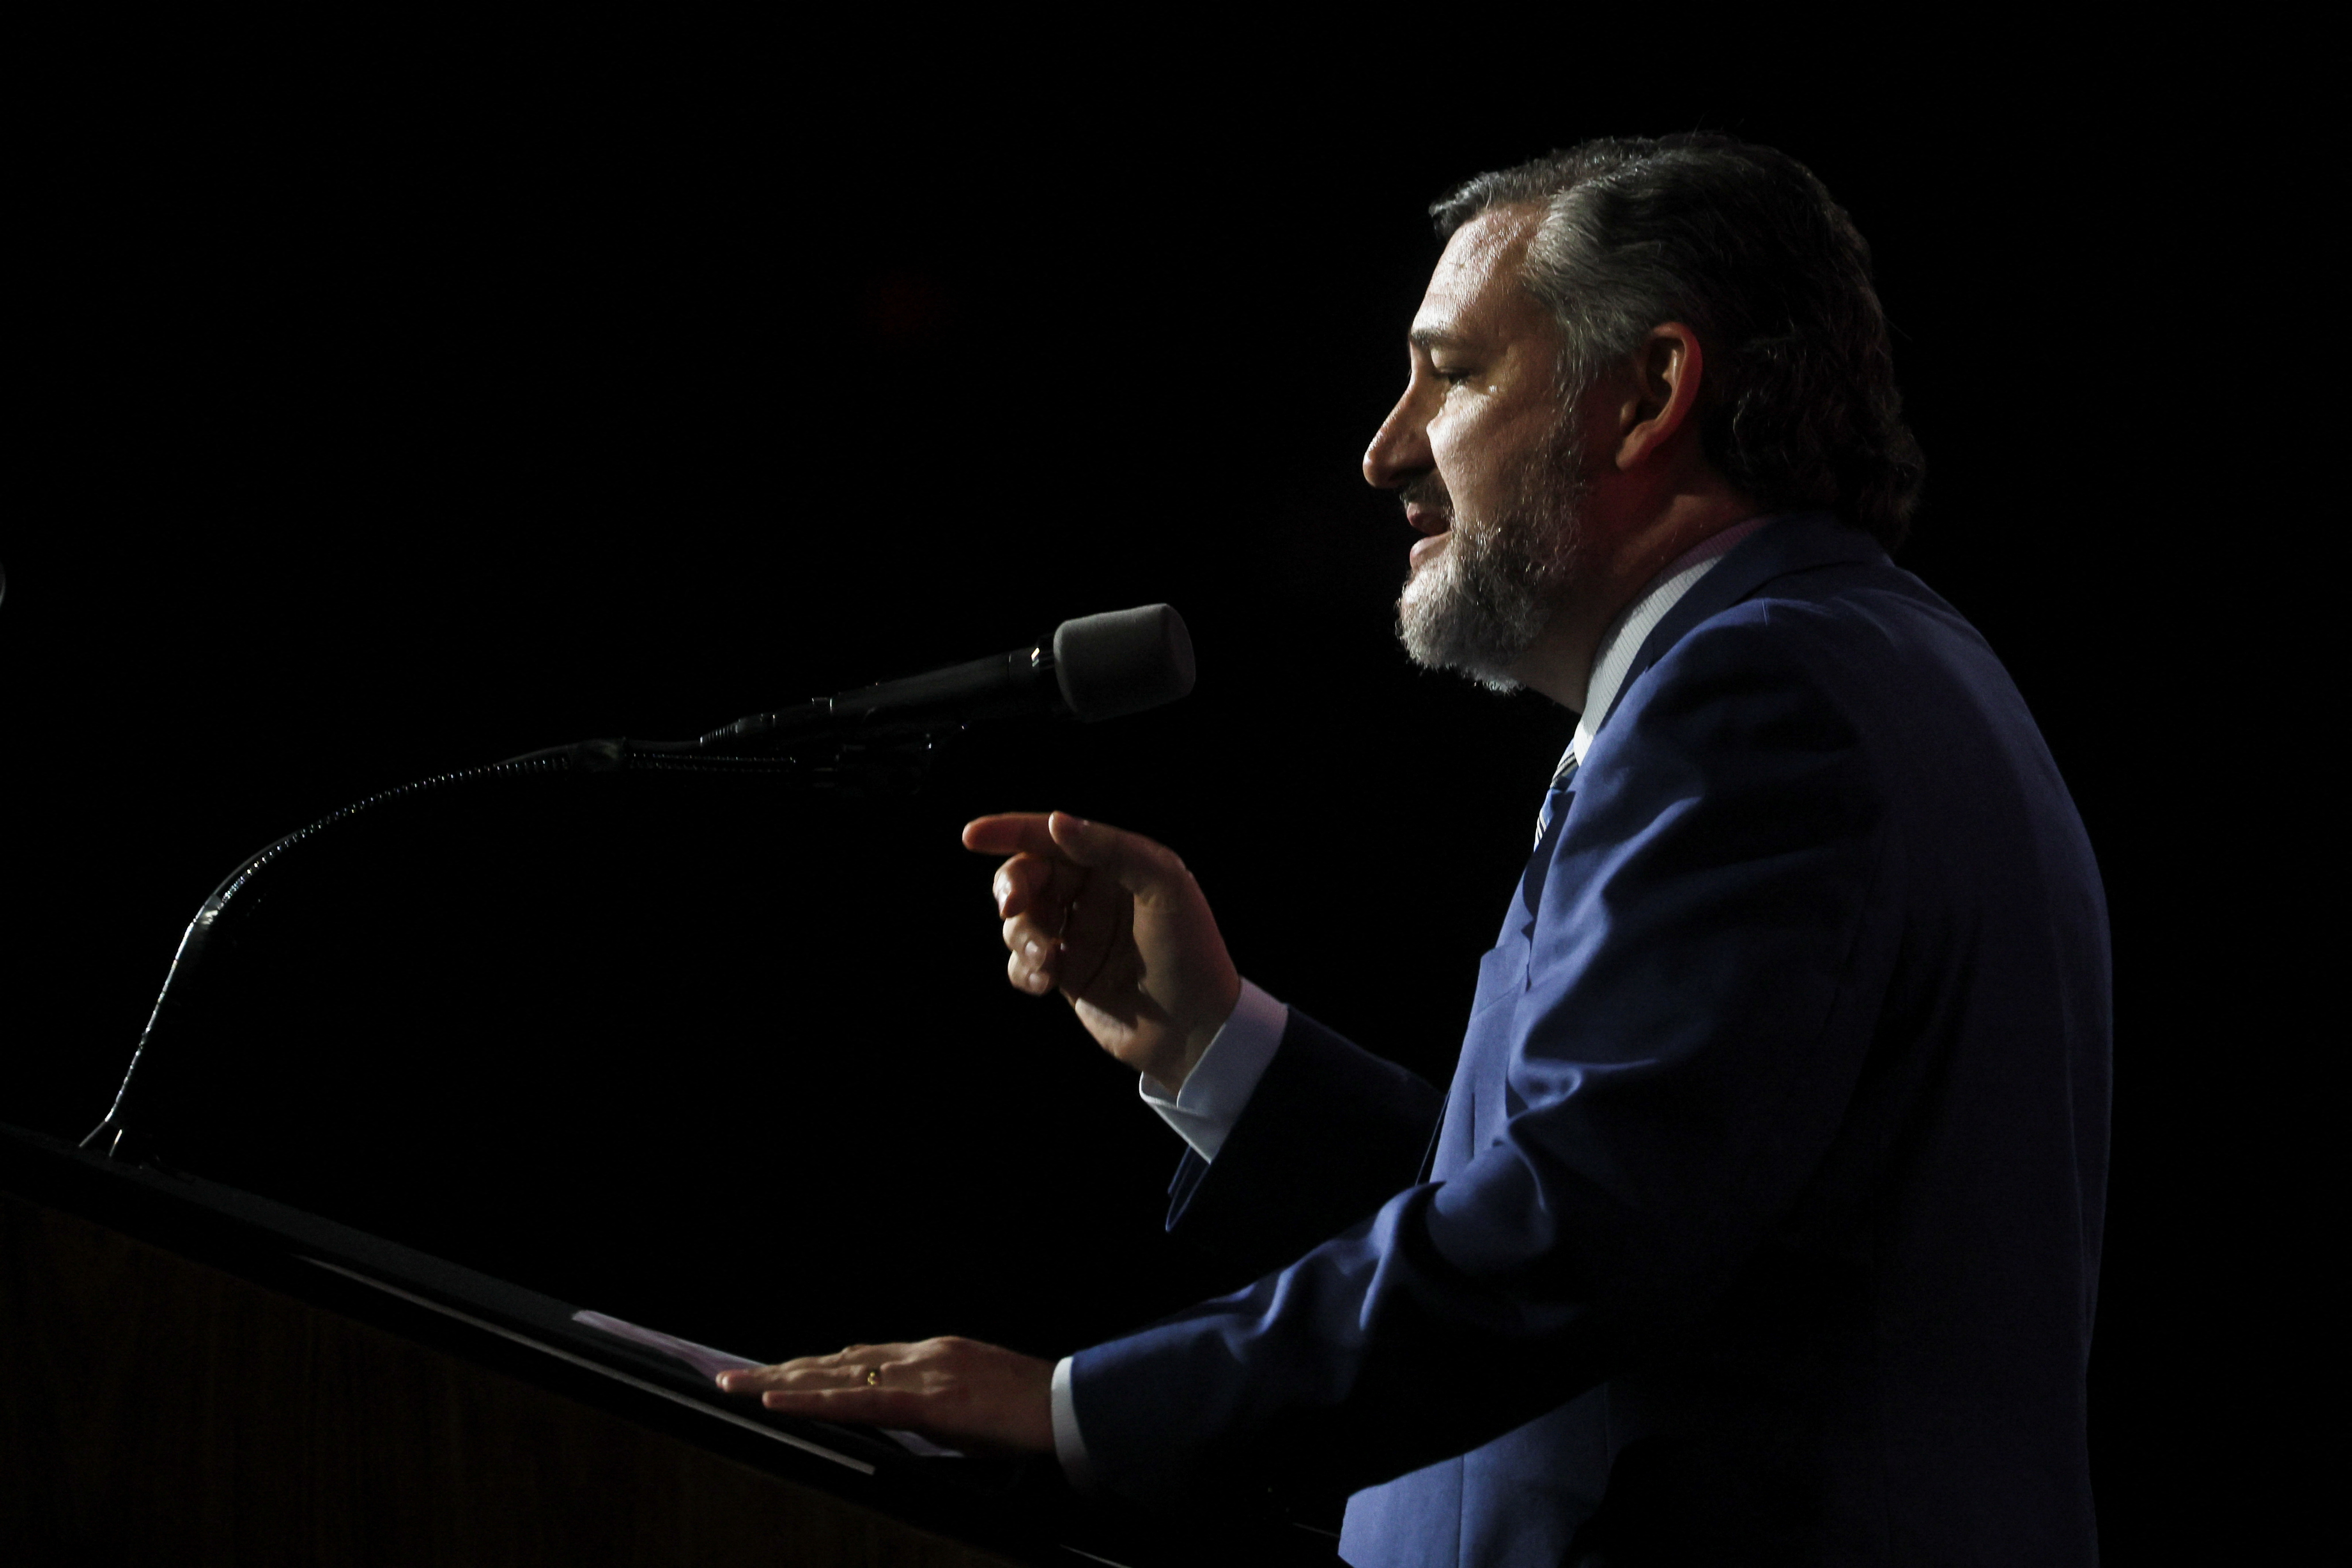 Texas Sen. Ted Cruz speaks at the National Rifle Association (NRA) annual convention in Houston, Texas, on Friday.